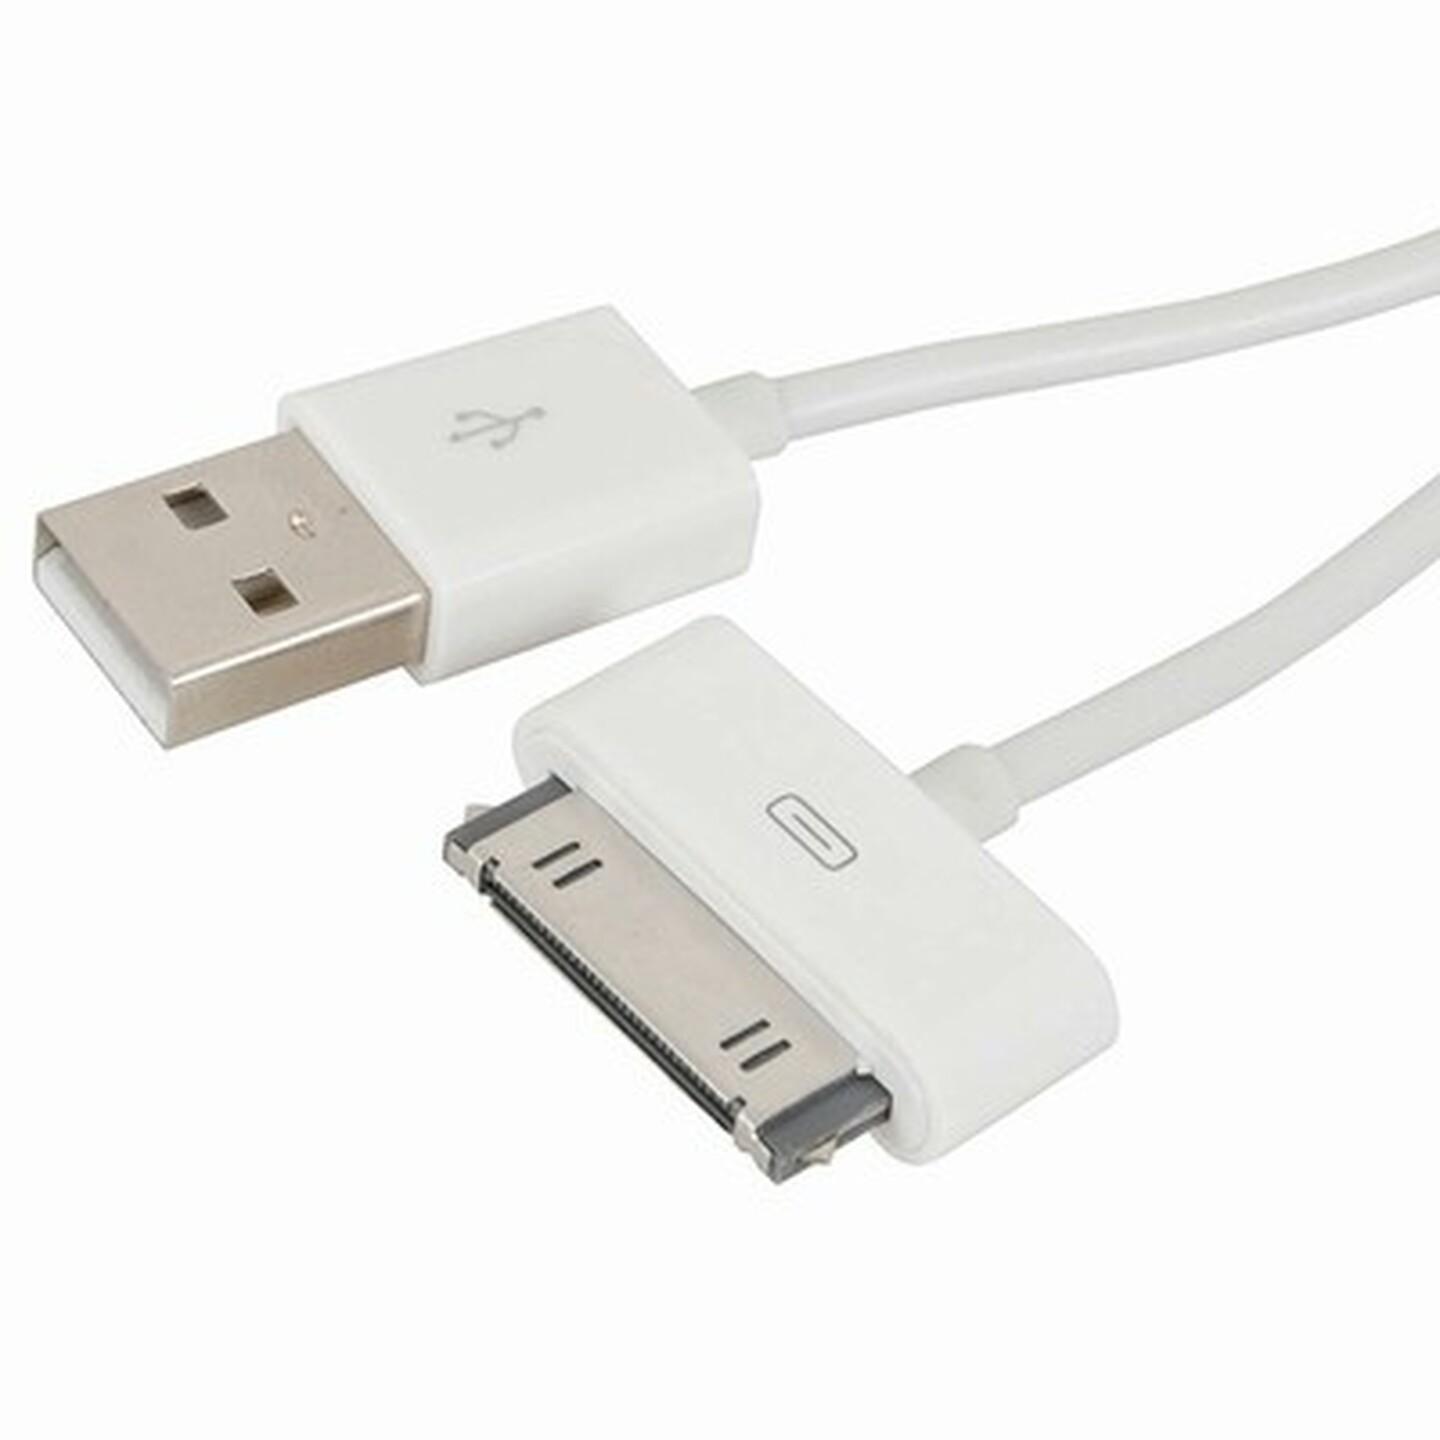 3m USB Cable for iPad/iPhone/iPod